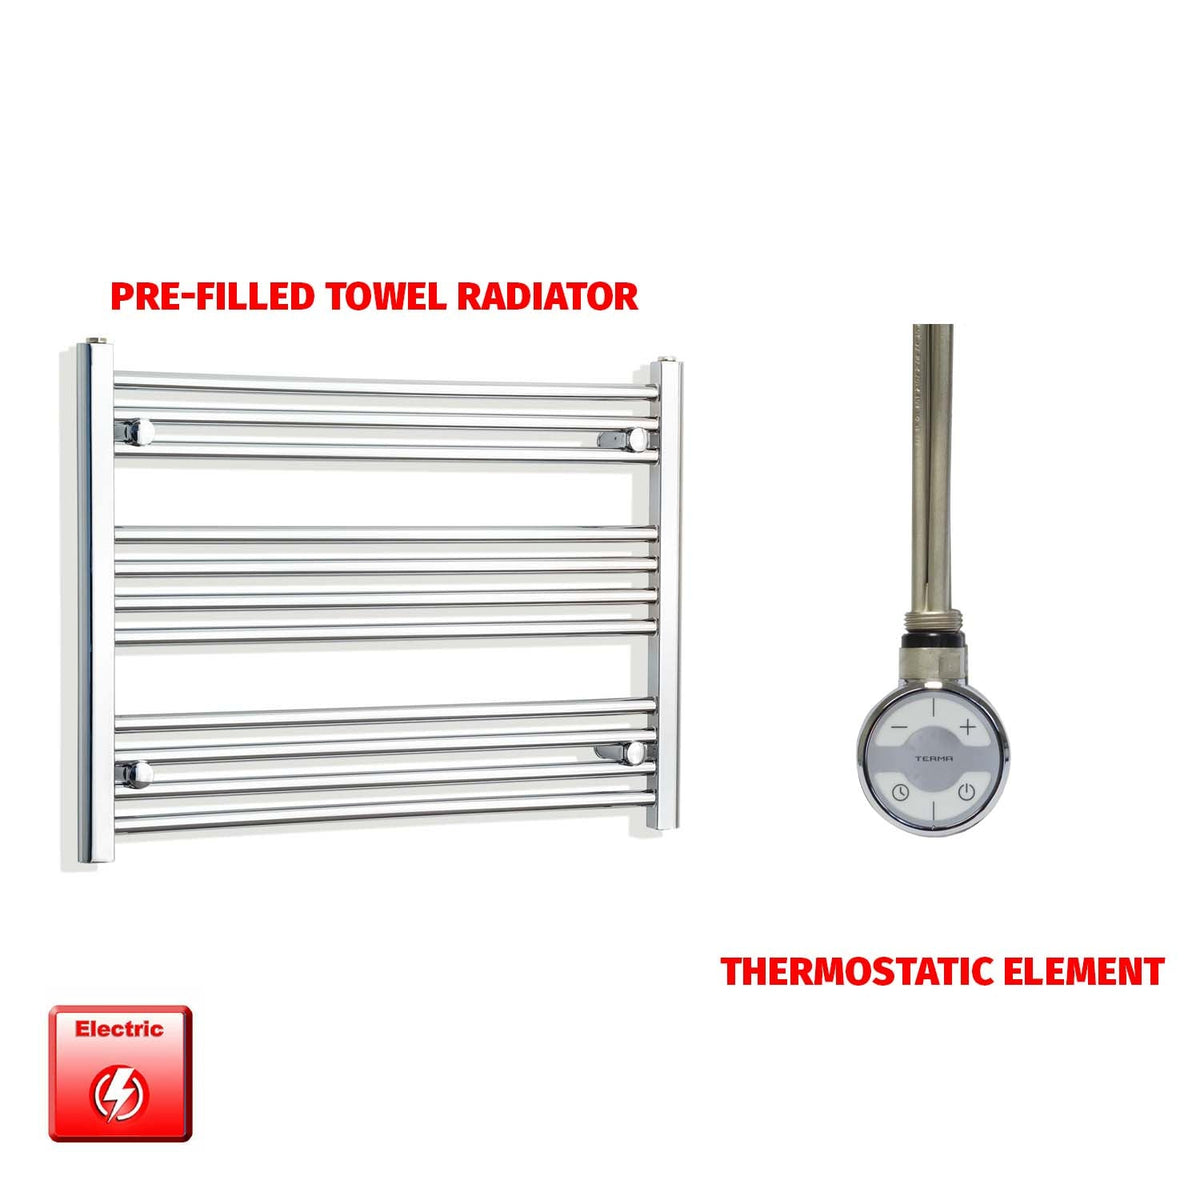 600mm High 850mm Wide Pre-Filled Electric Heated Towel Radiator Straight Chrome MOA Thermostatic element no timer